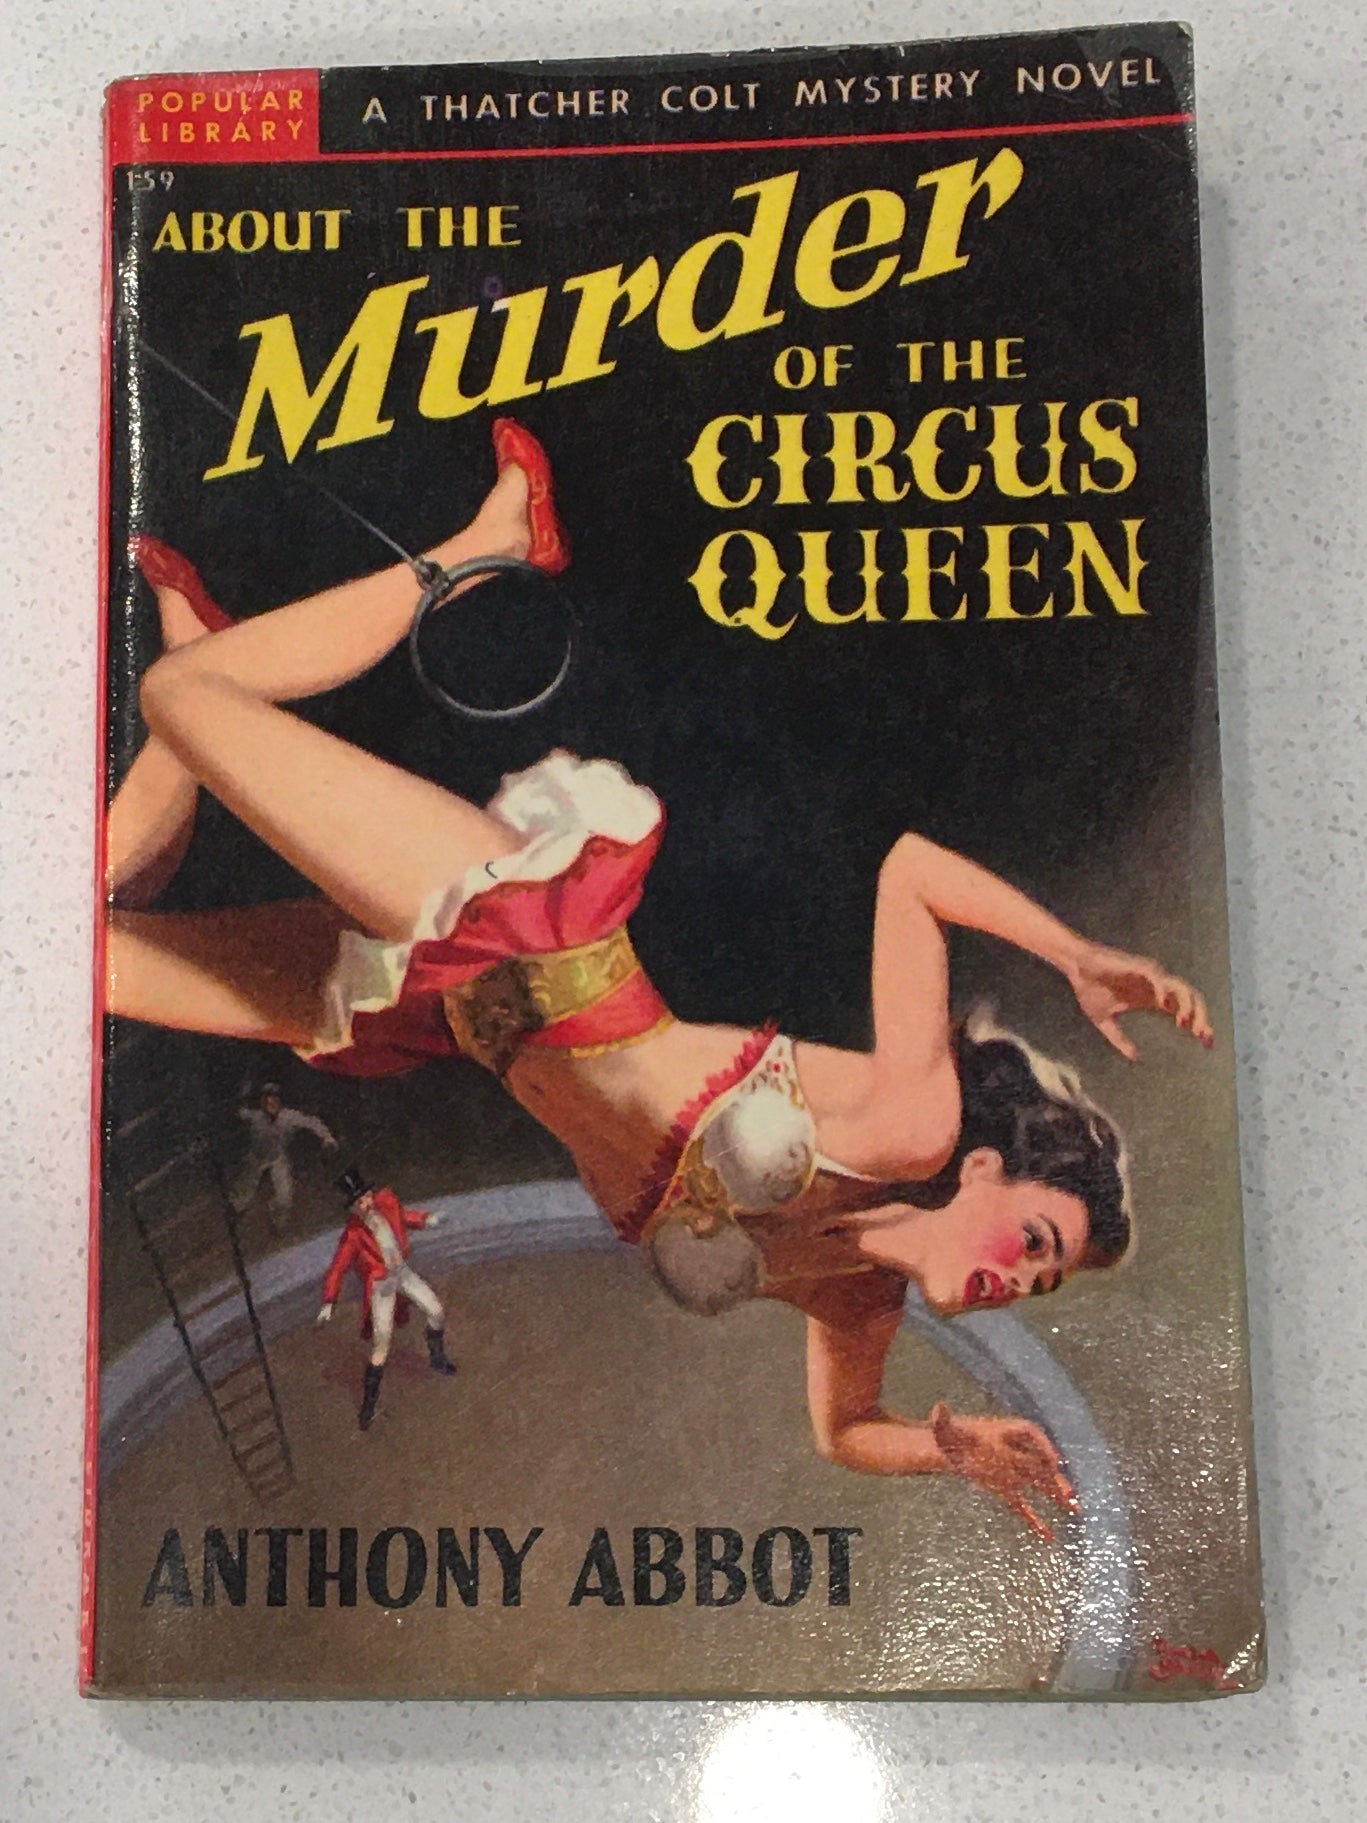 About the Murder of the Circus Queen